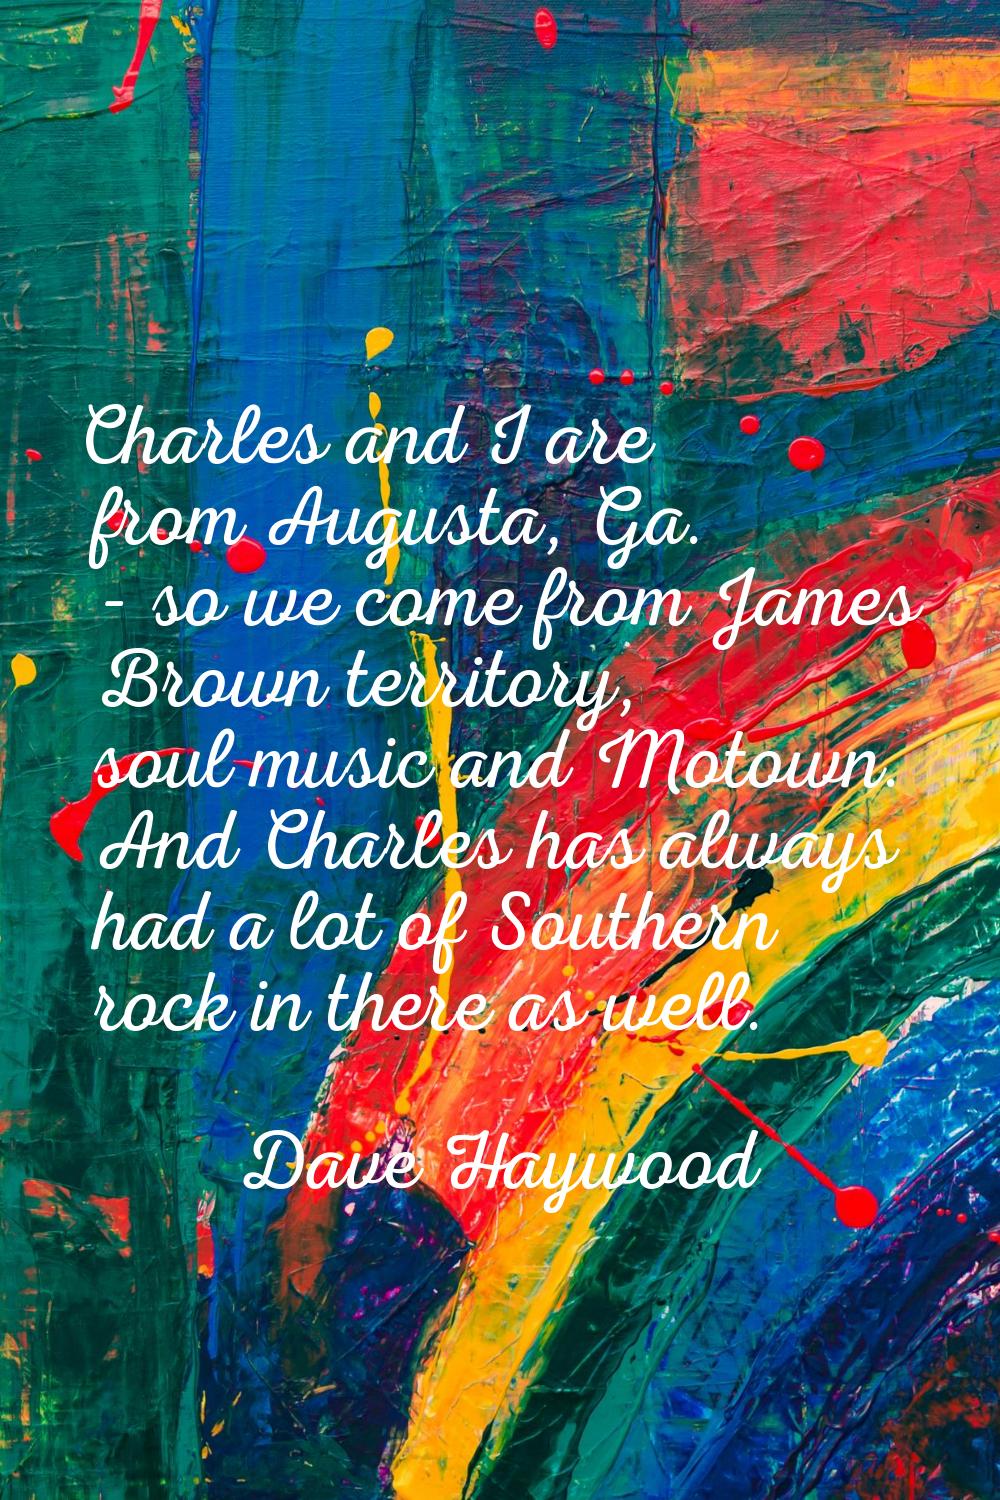 Charles and I are from Augusta, Ga. - so we come from James Brown territory, soul music and Motown.